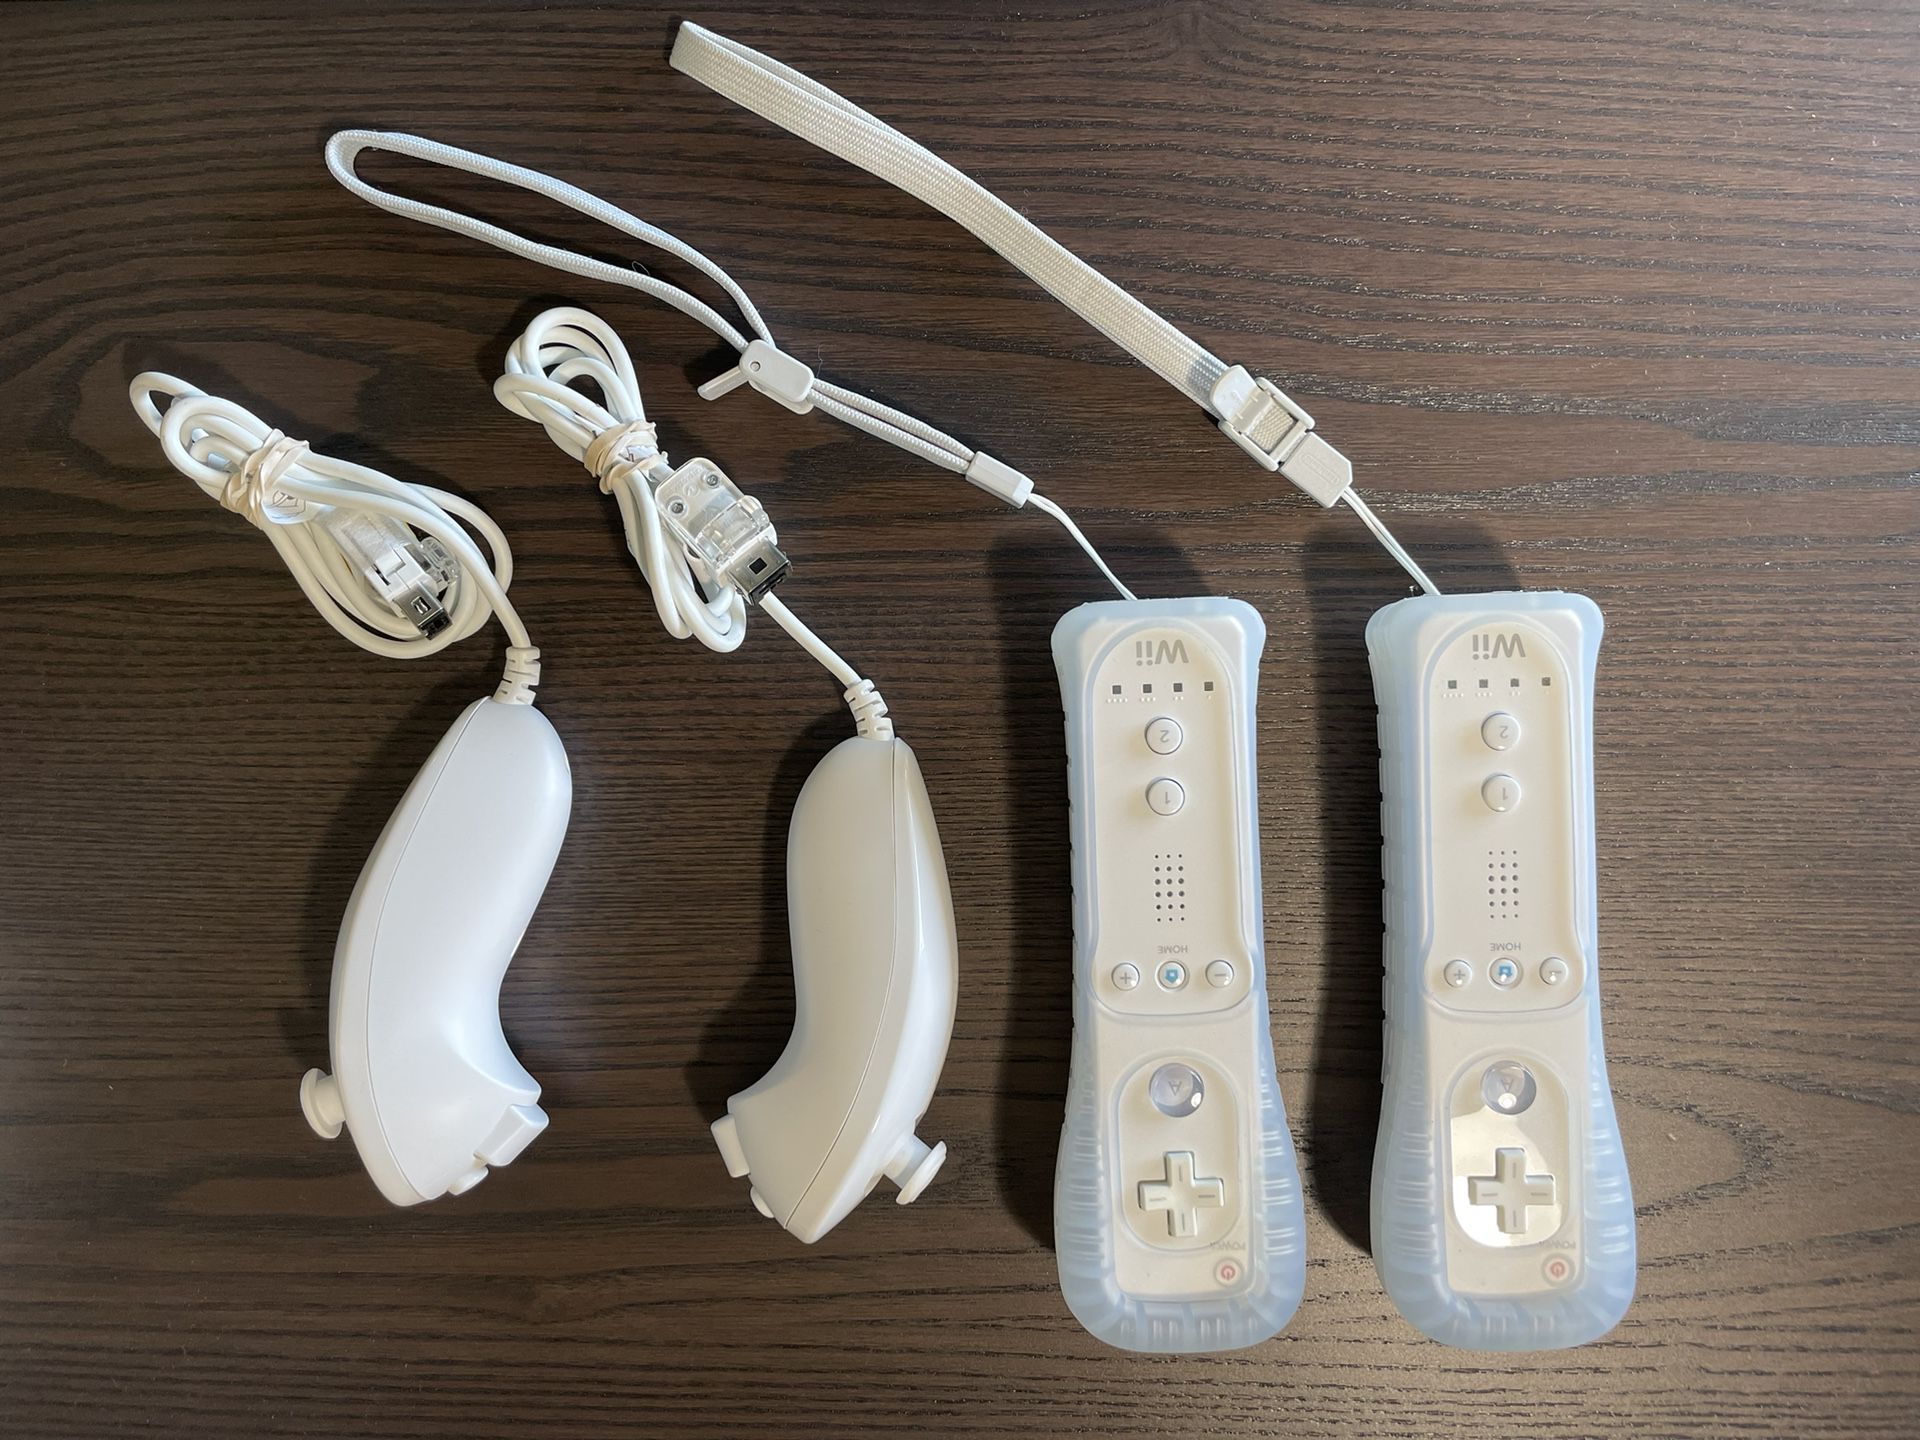 $40 For Two OEM Nintendo Wii / Wii U Remotes With Nunchucks And Silicon Cases